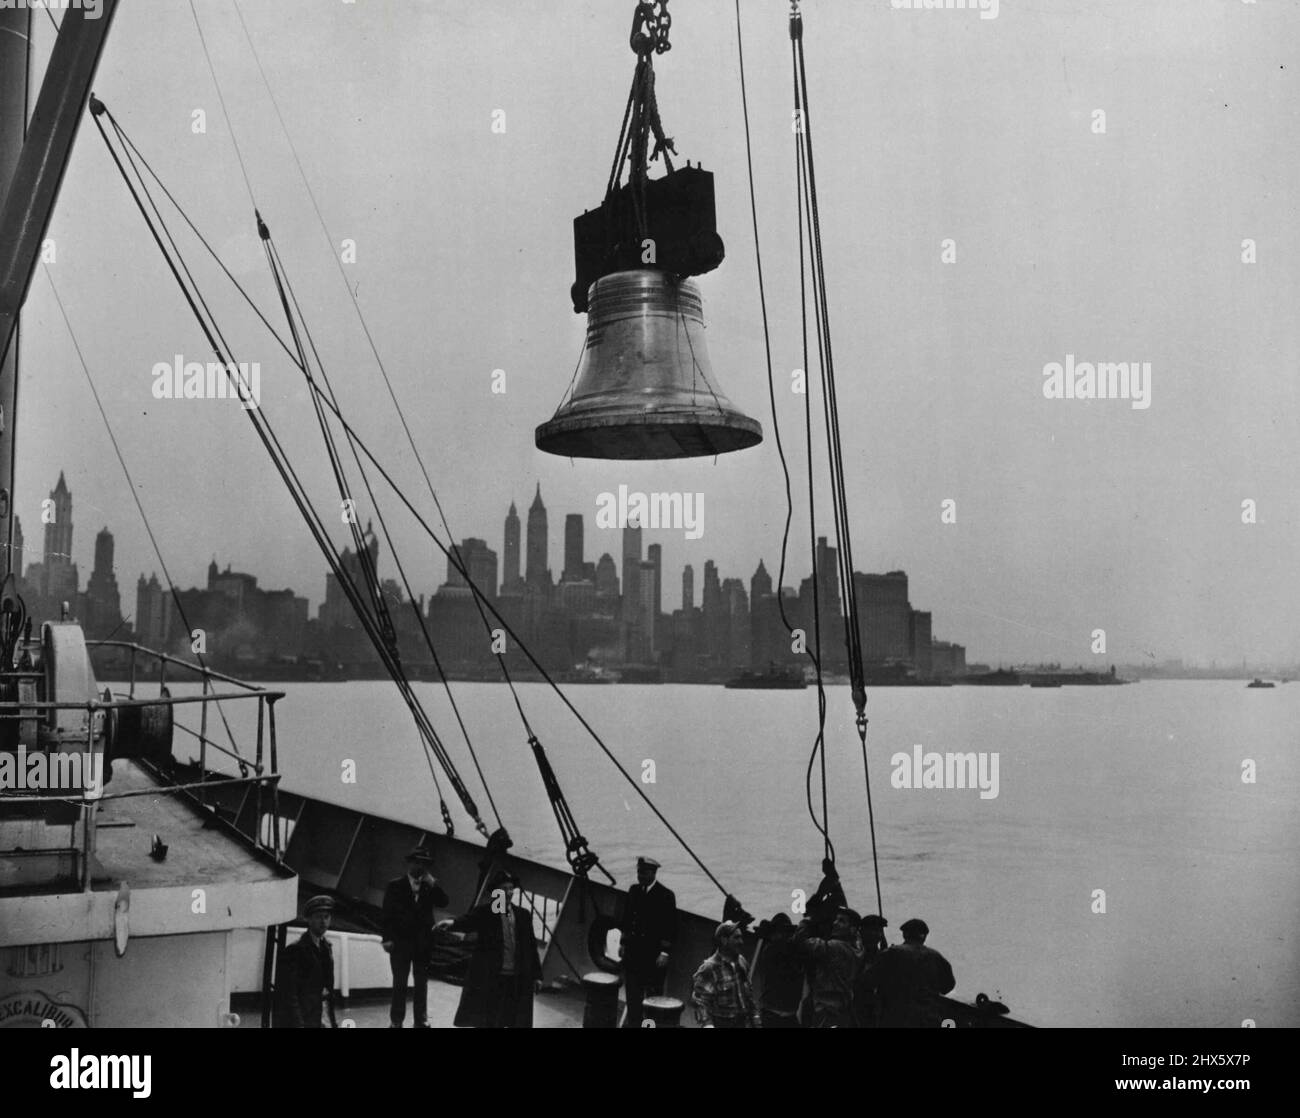 One of the 13 bells being unloaded from the steamship Excalibur at Jersey City, New Jersey. In background is the skyline of New York City. Thirteen replicas of the Liberty Bell, the first shipment of 52 to be used in connection with the Independence Savings Bond campaign of the U.S. Treasury Department, arrived recently (April 21, 1950) in the United States from Annecy, France, where they were cast. During the 6-week campaign, which begins May 15, 1950 and ends July 4, 1950, the bells will be ex Stock Photo